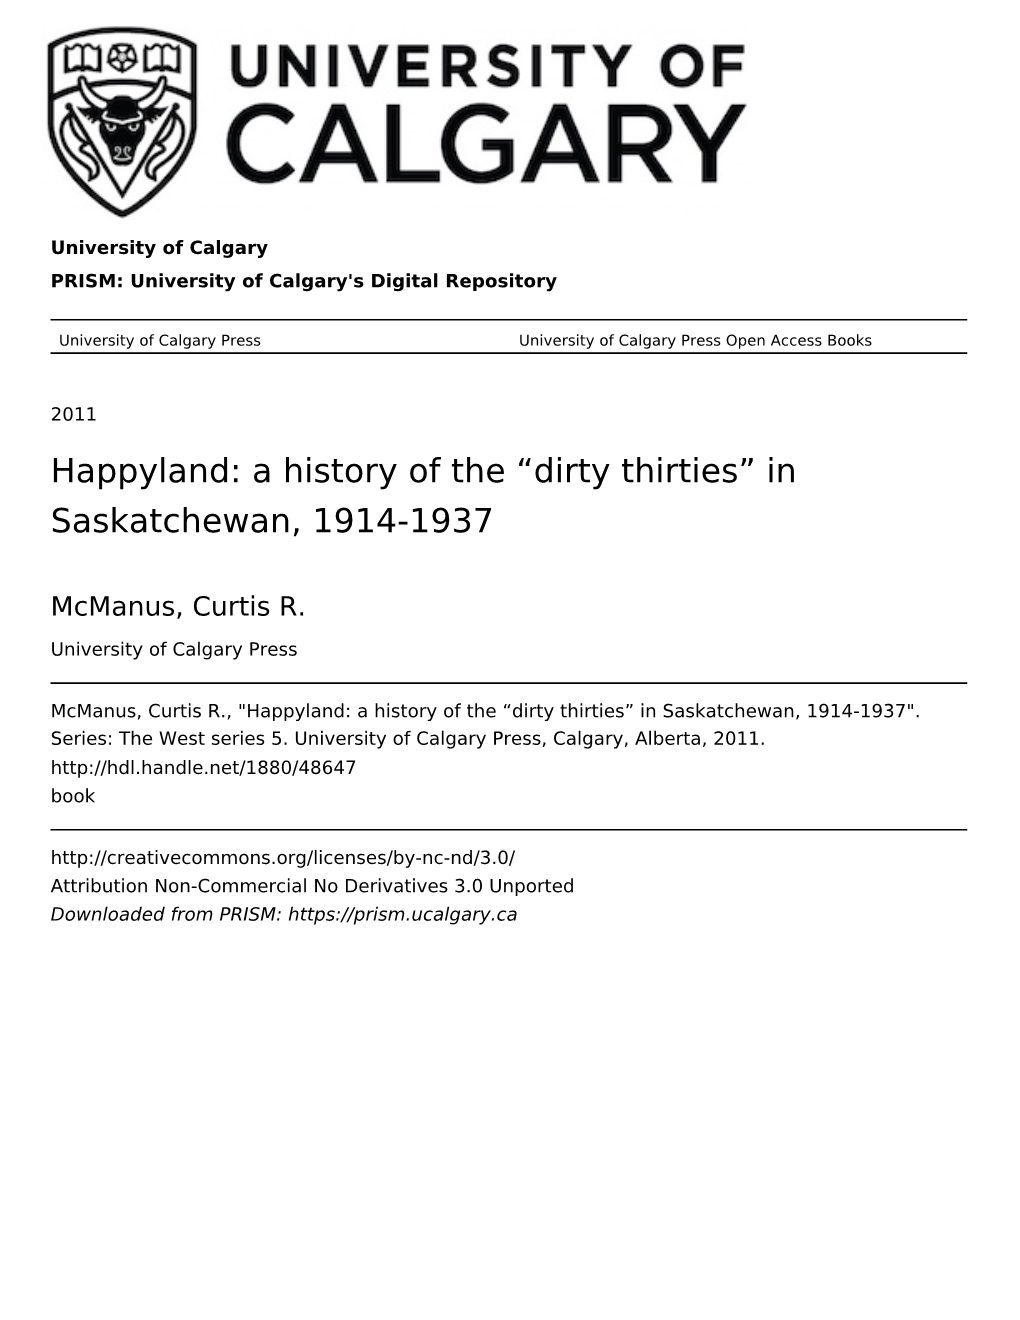 Happyland: a History of the “Dirty Thirties” in Saskatchewan, 1914-1937